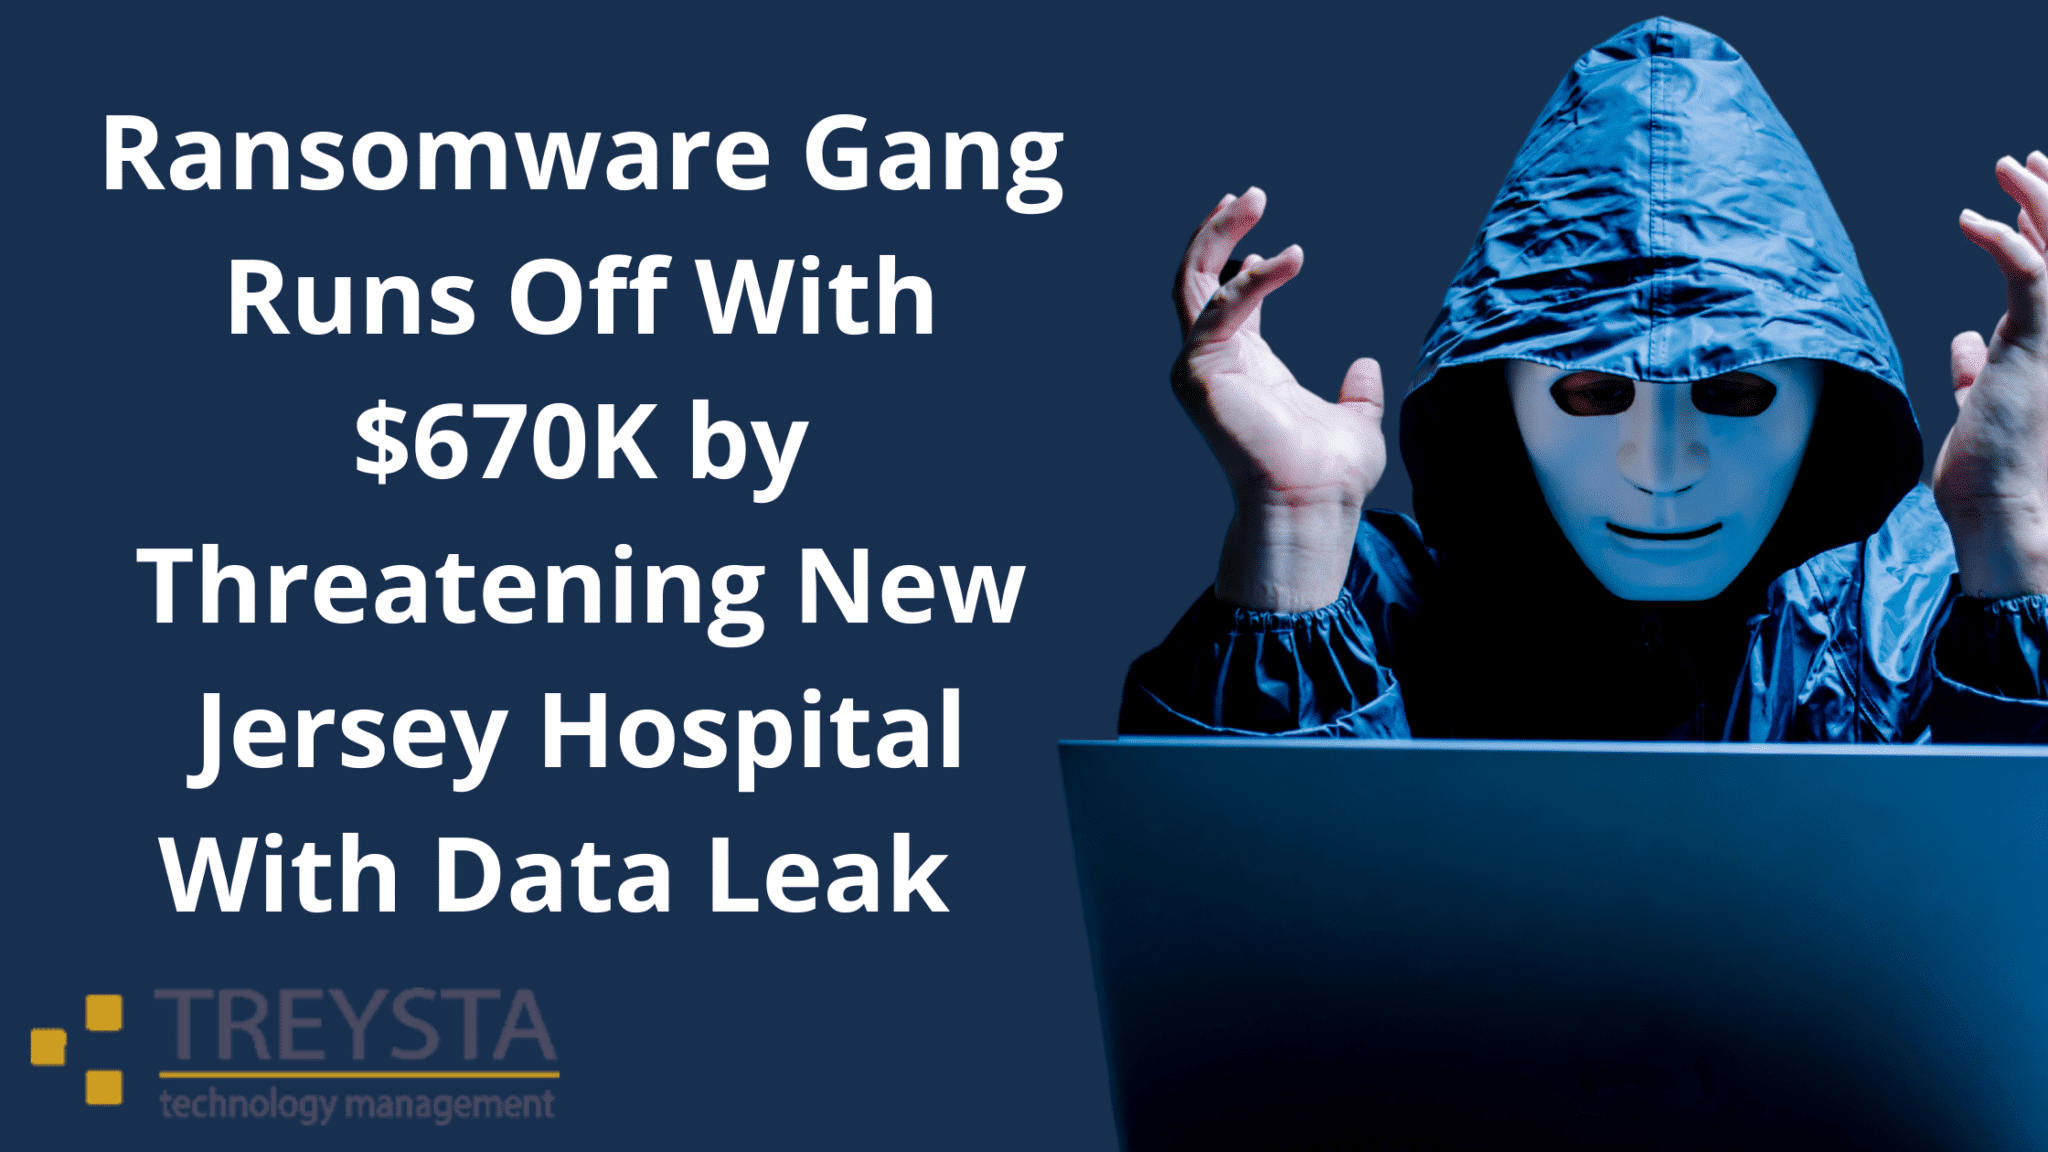 Ransomware Gang, SunCrypt, Runs Off With $670K by Threatening New Jersey Hospital With Data Leak